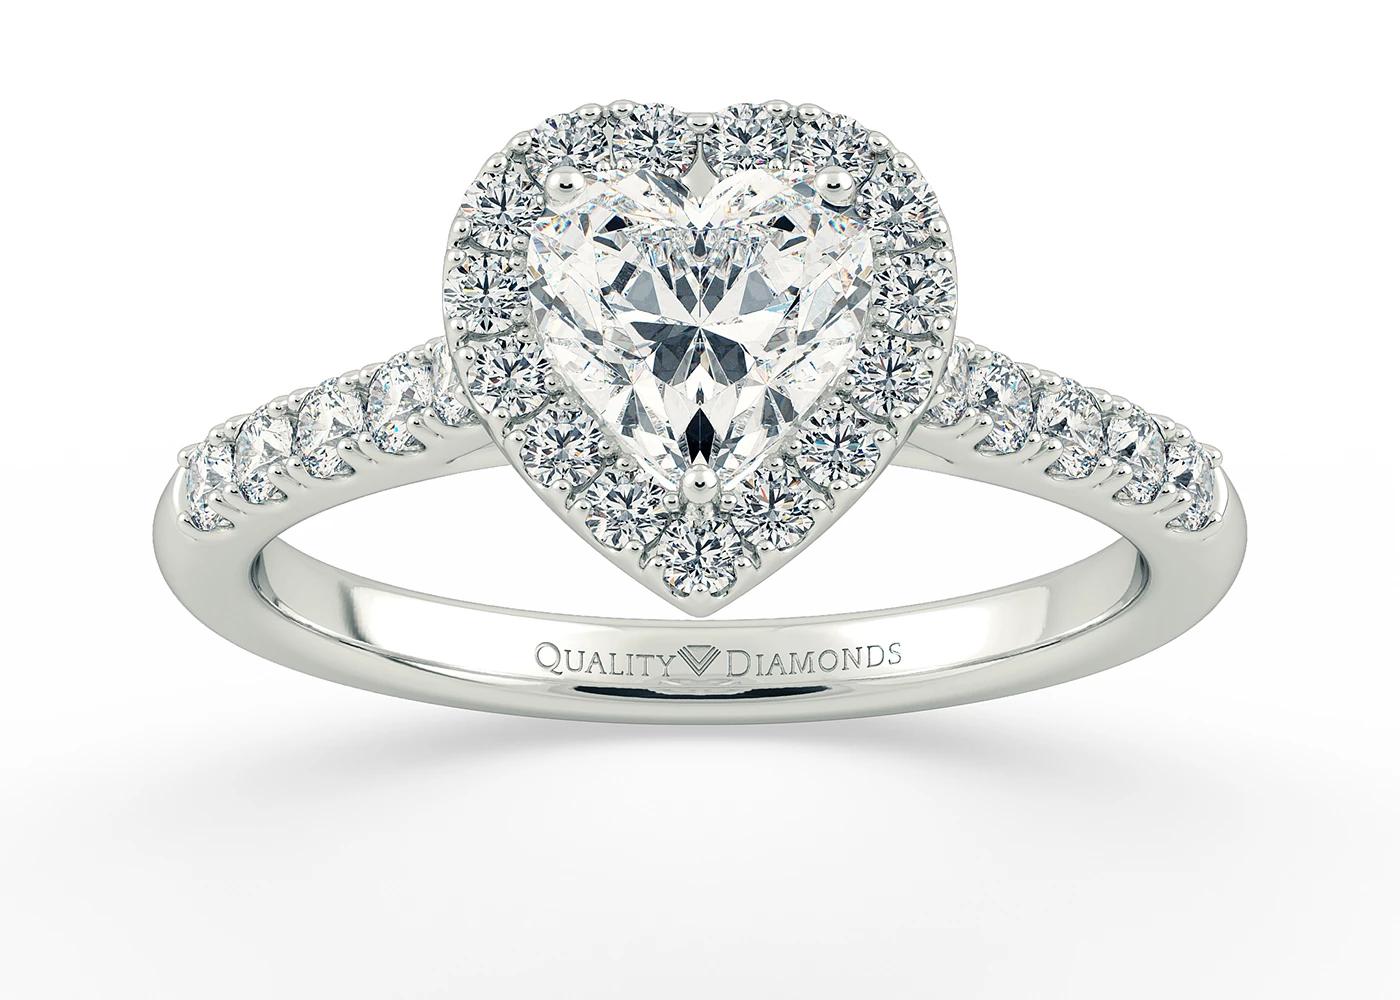 Two Carat Halo Heart Diamond Ring in 9K White Gold